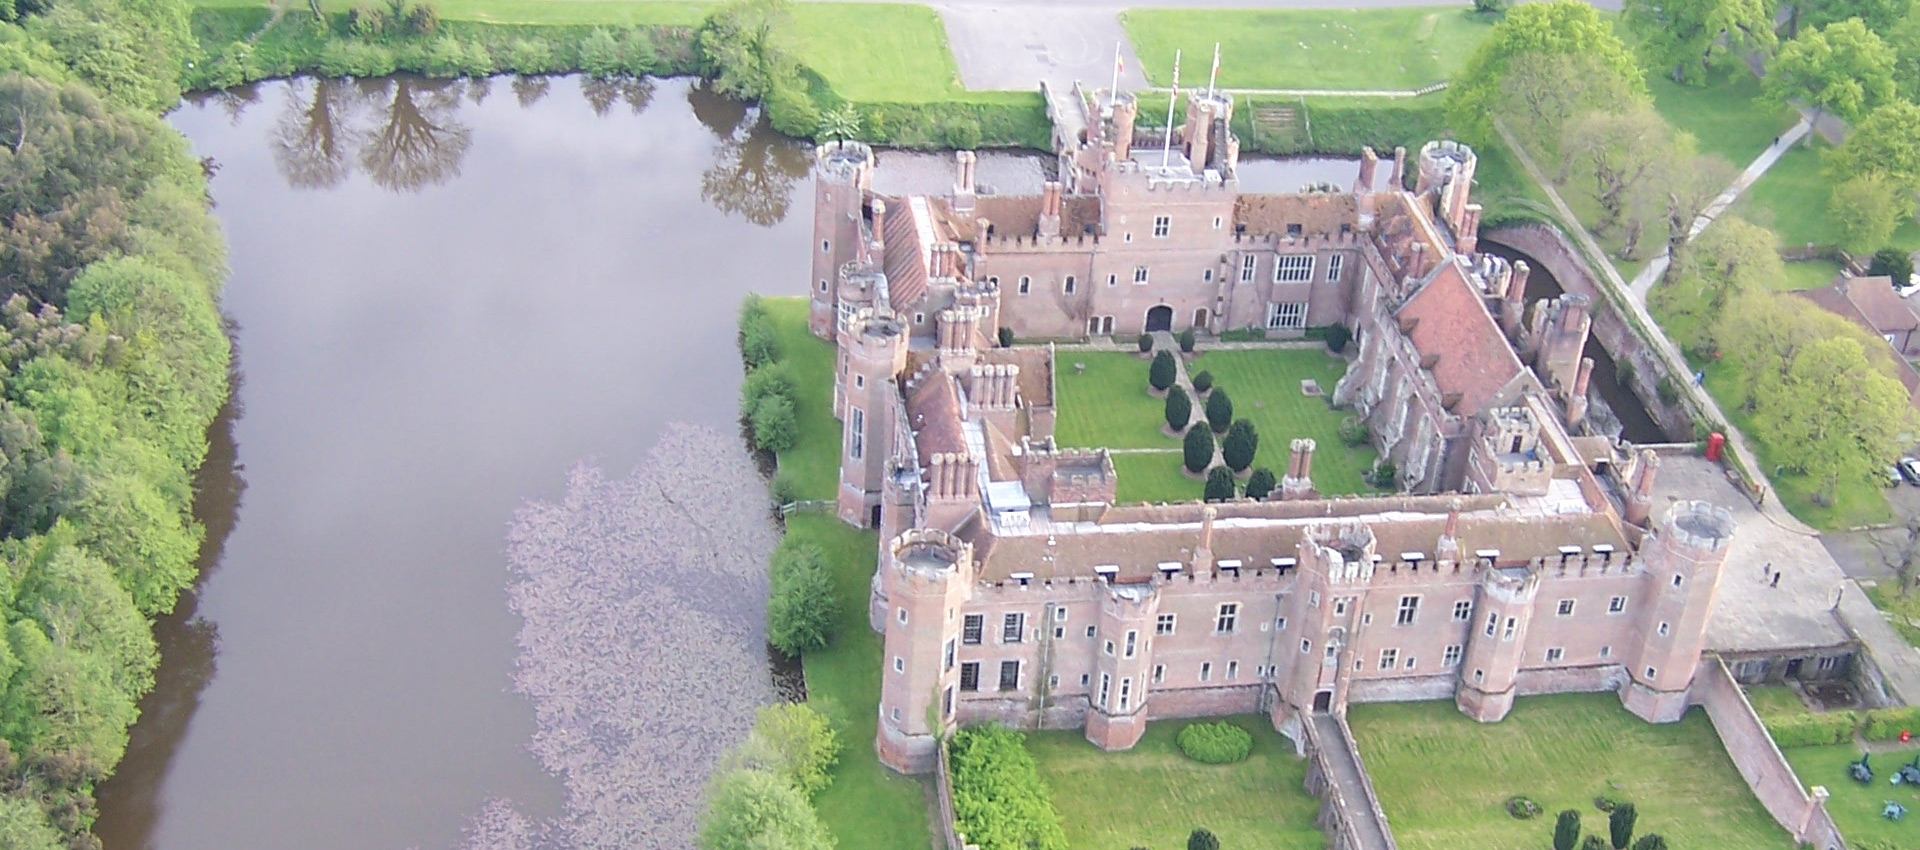 An aerial view of the Castle